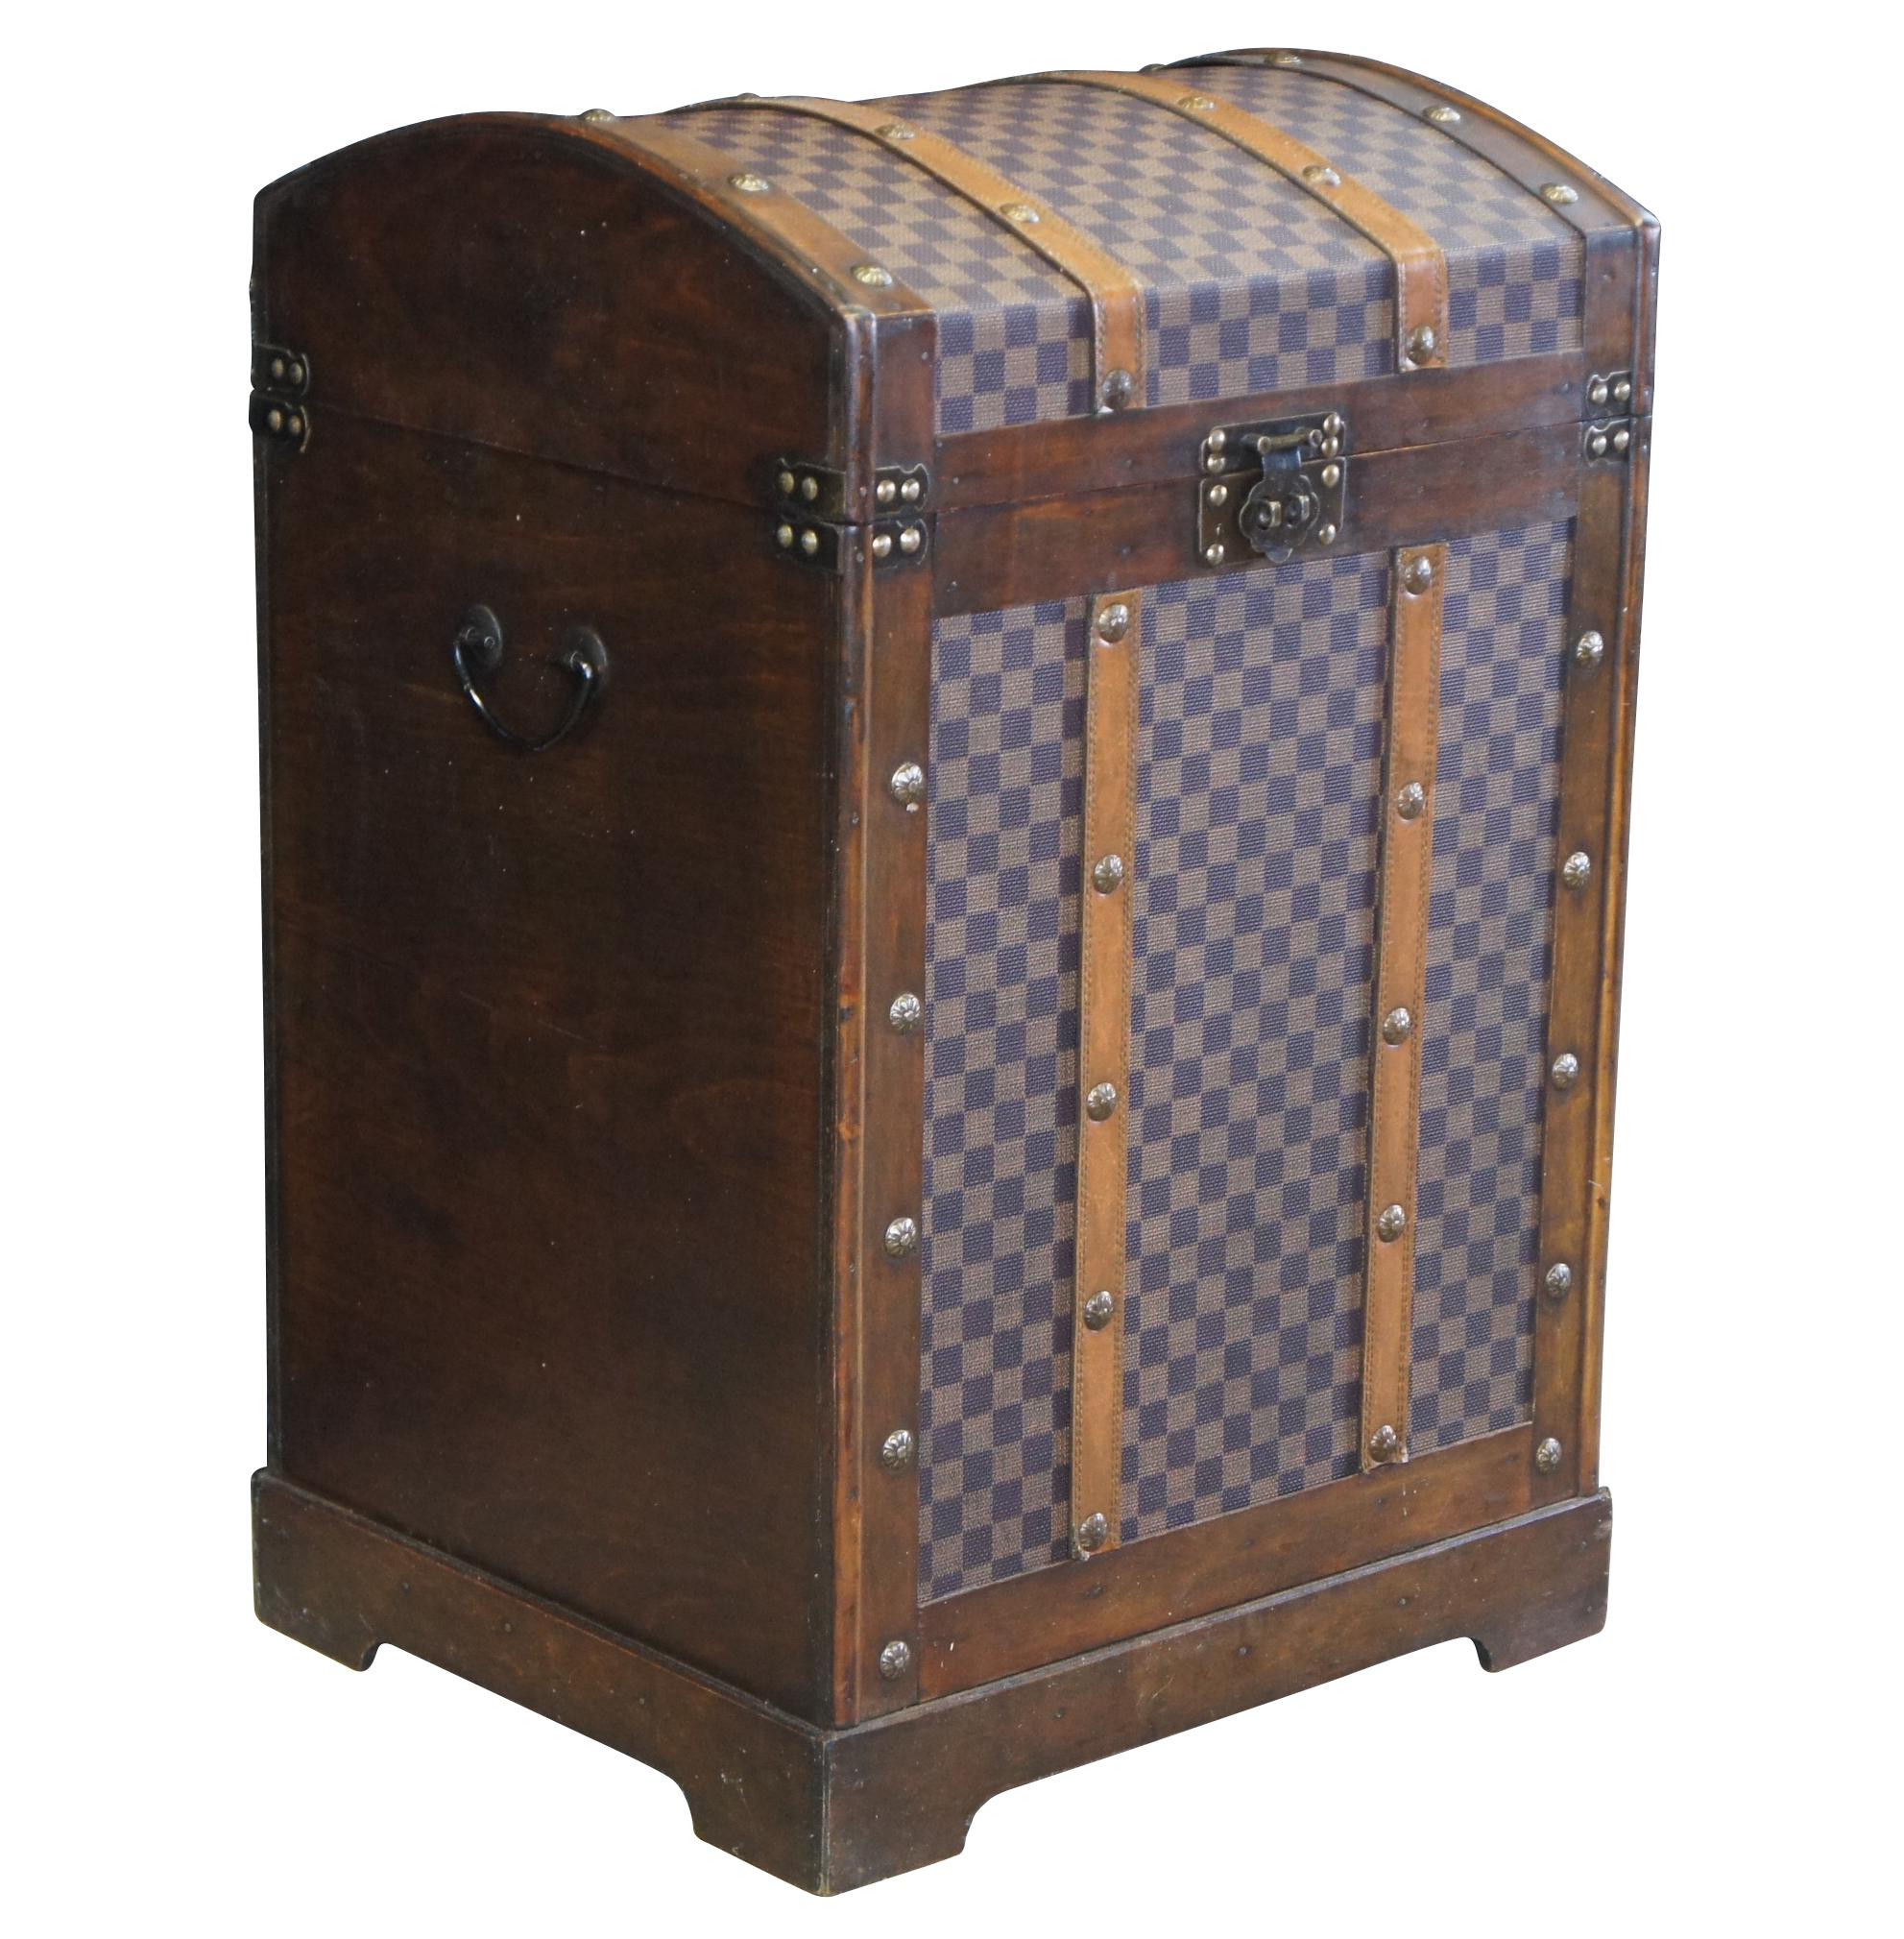 Vintage Wooden Dome Top Storage Trunk Checkered Monogrammed Canvas Chest In Good Condition For Sale In Dayton, OH